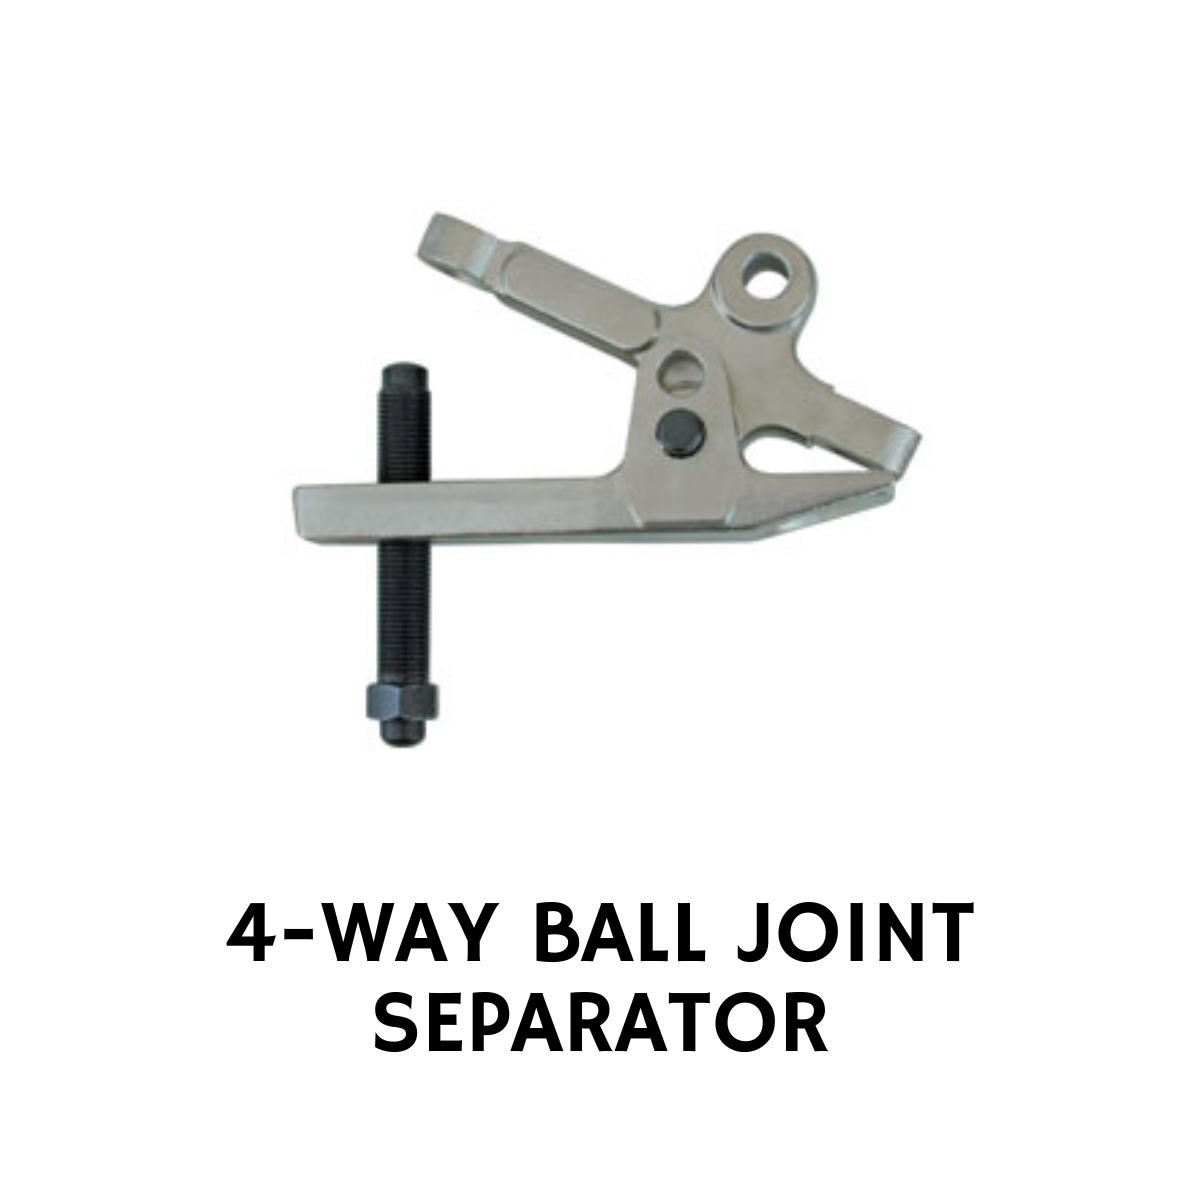 FOUR WAY BALL JOINT SEPARATOR